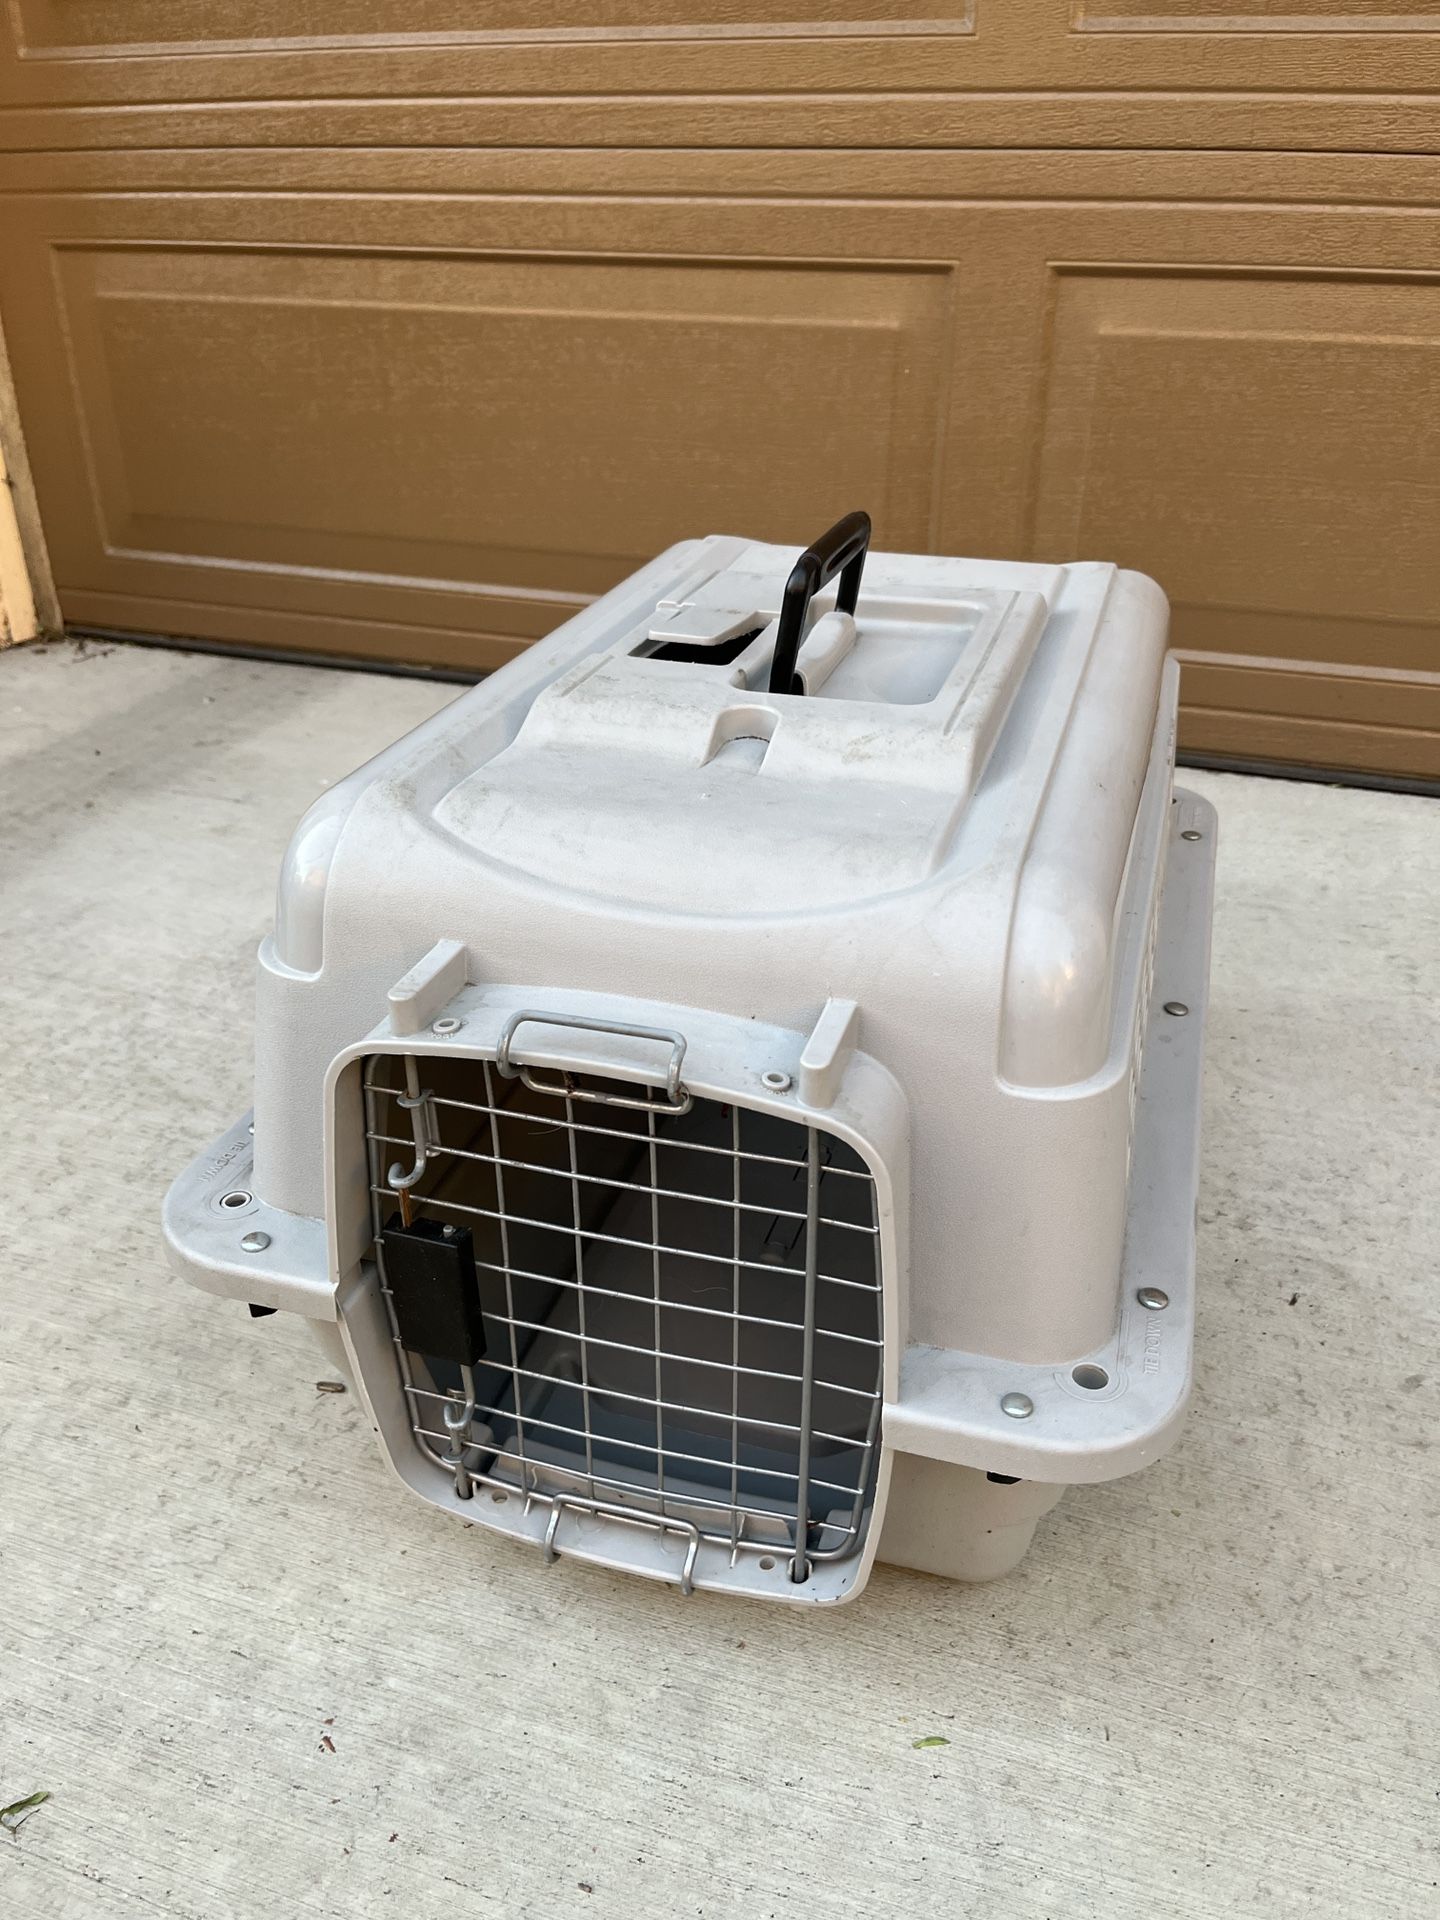 Pet Carrier. Strong Plastic. Easy Assembly. Clean Inside. 23”x12”x13”